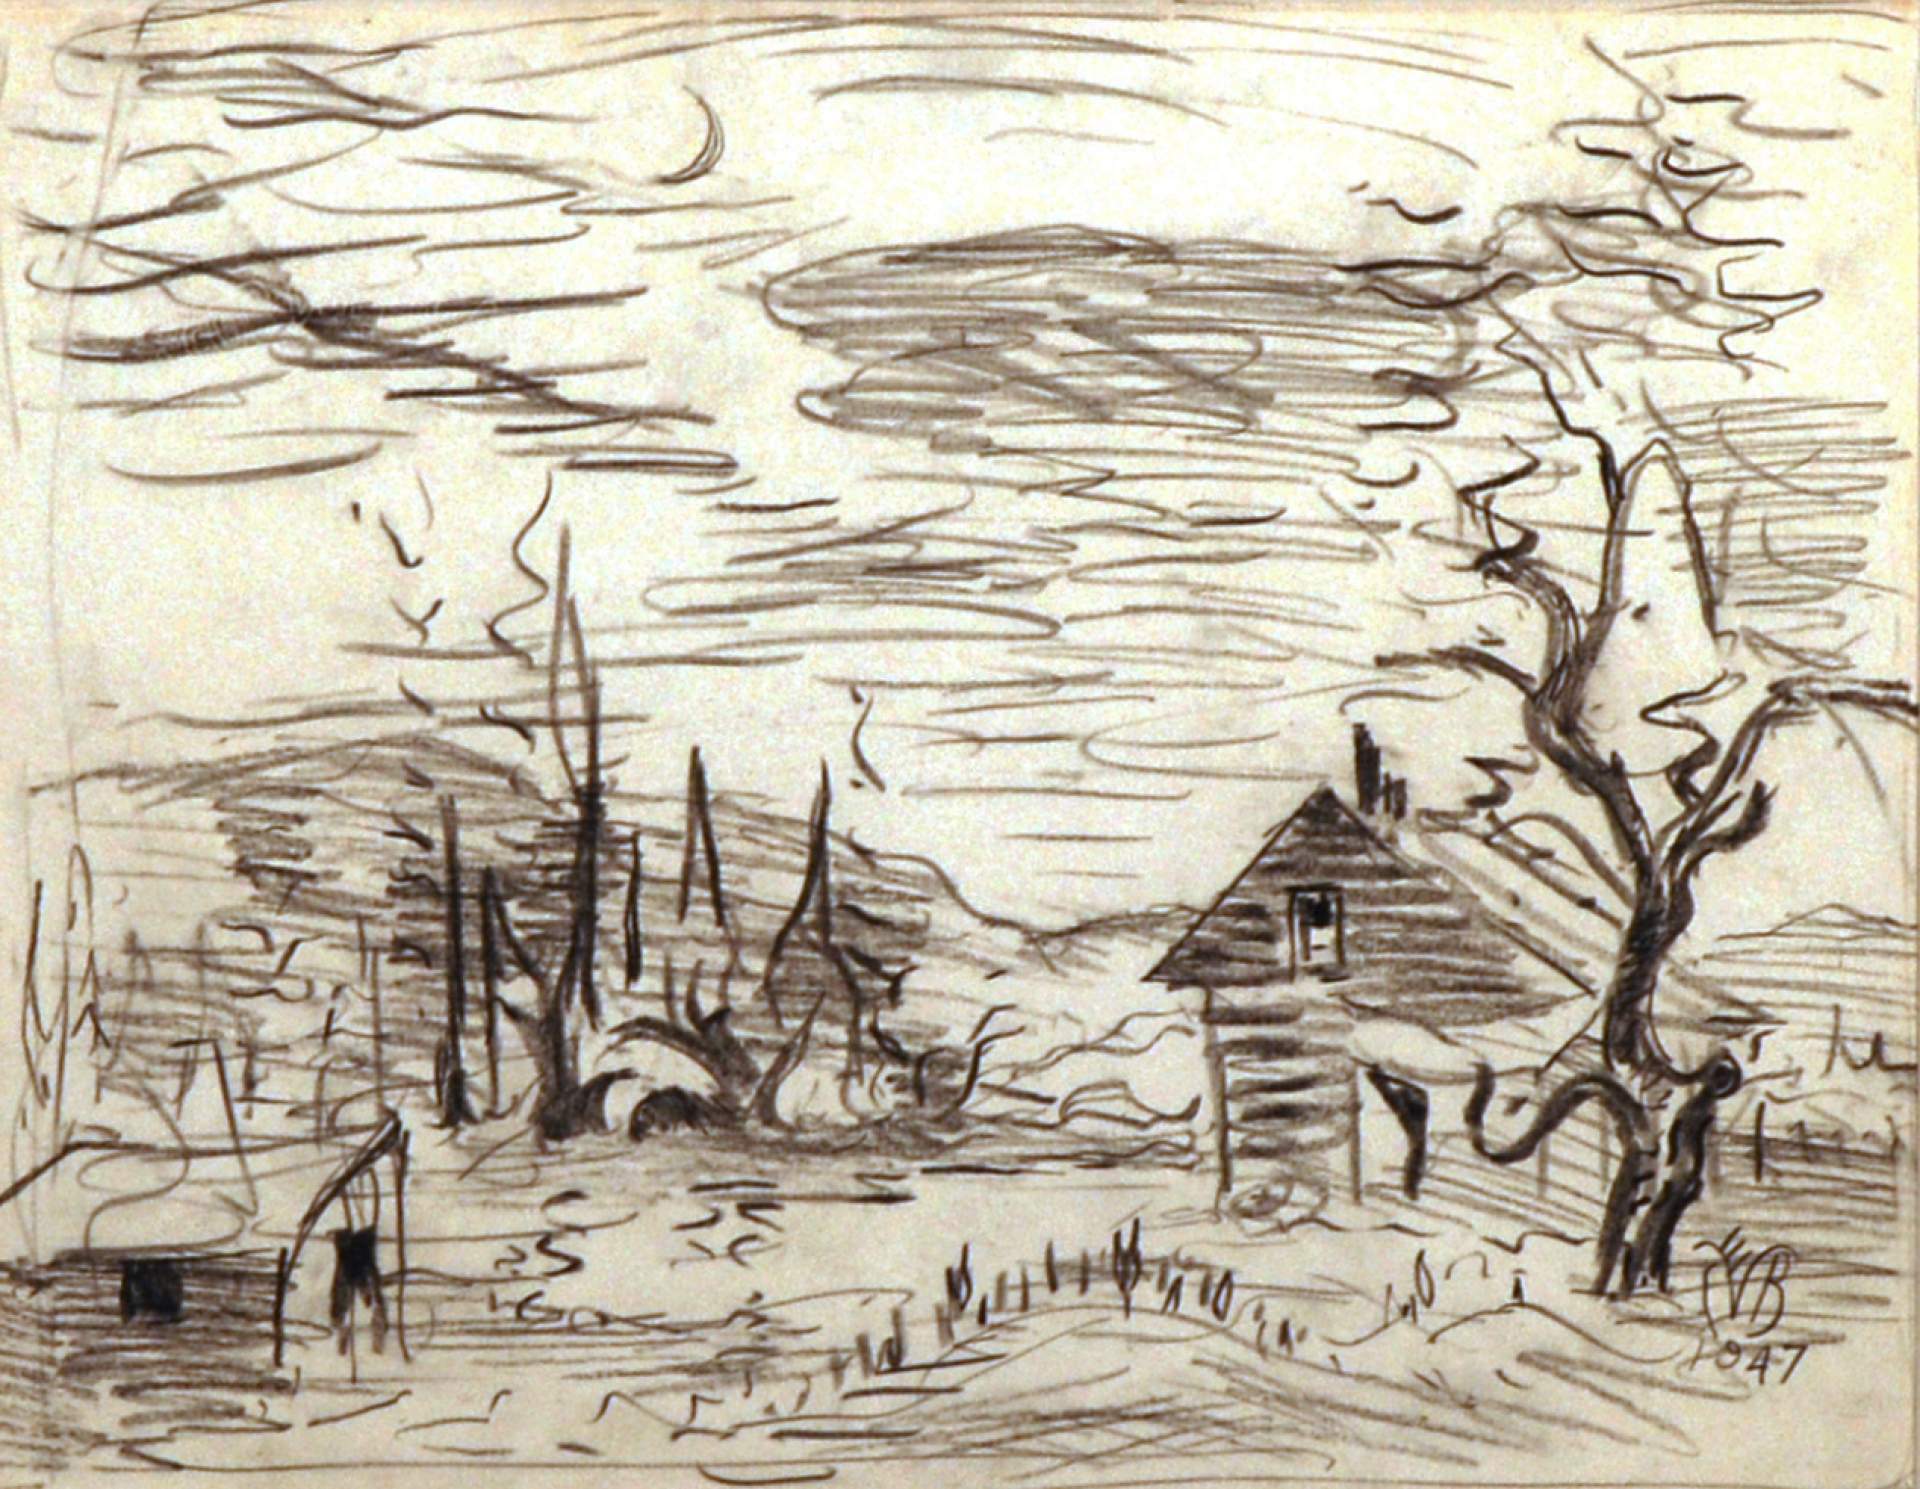 Mystery: Works by Charles Burchfield